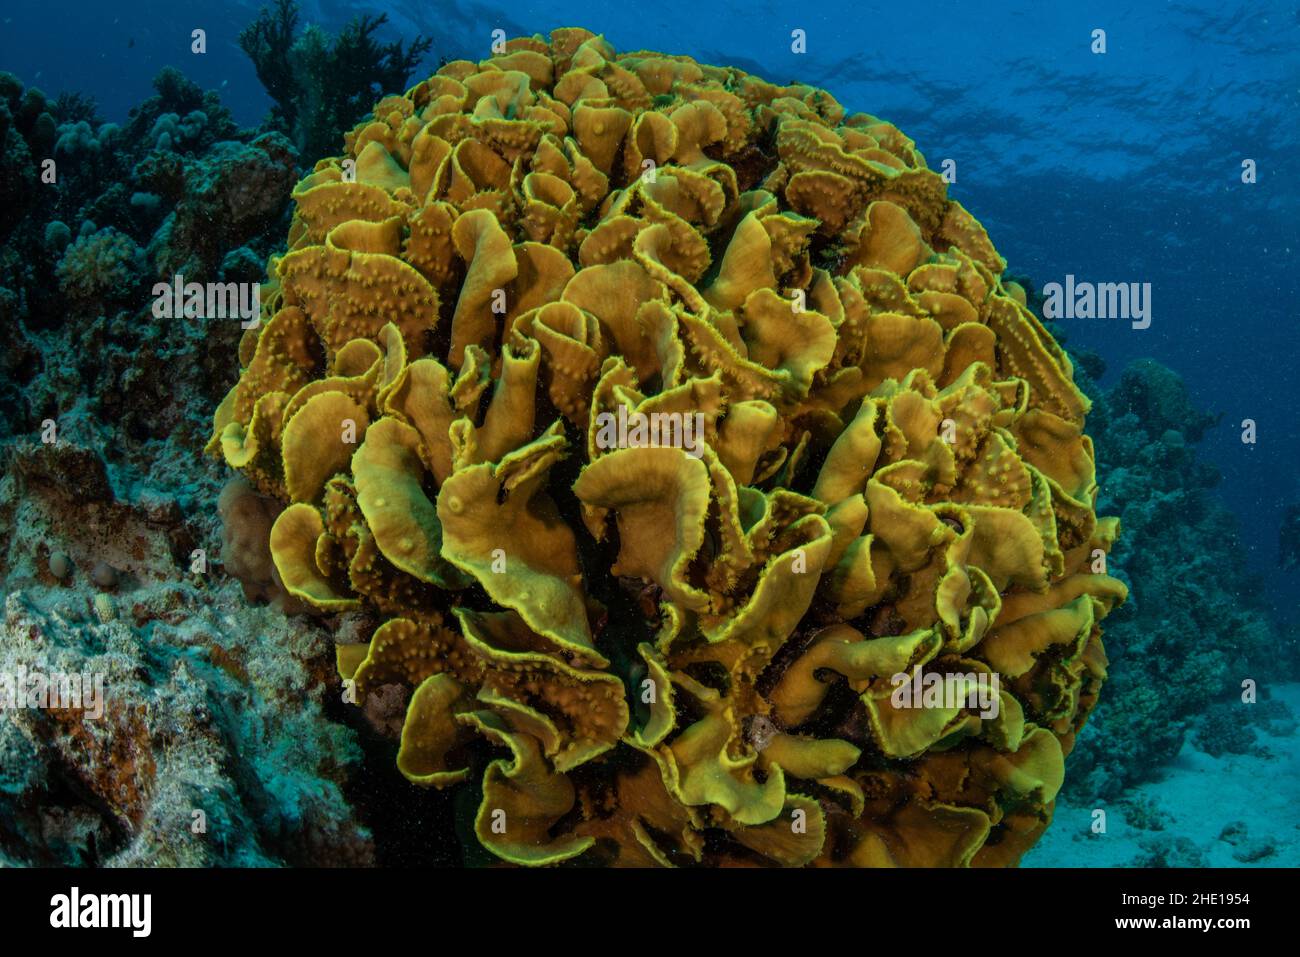 A vibrant yellow disc coral (Turbinaria mesenterina) on a reef in the red sea, Egypt. Stock Photo